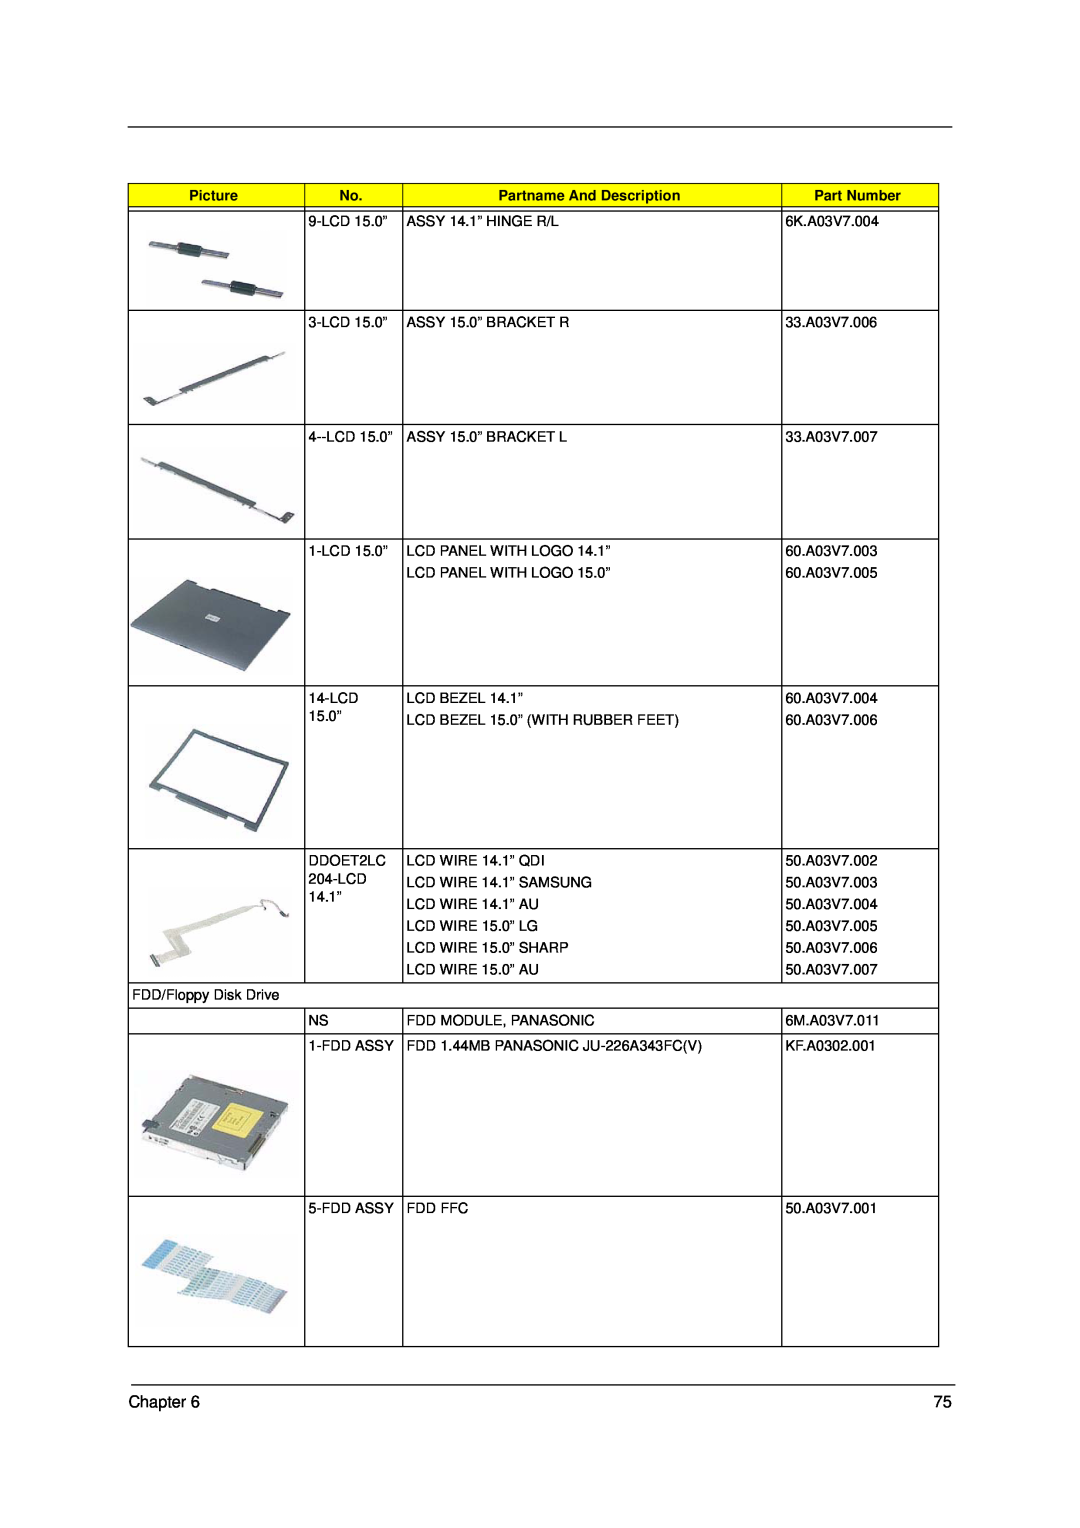 Acer 1300 Series manual Chapter, Picture, Partname And Description, Part Number 